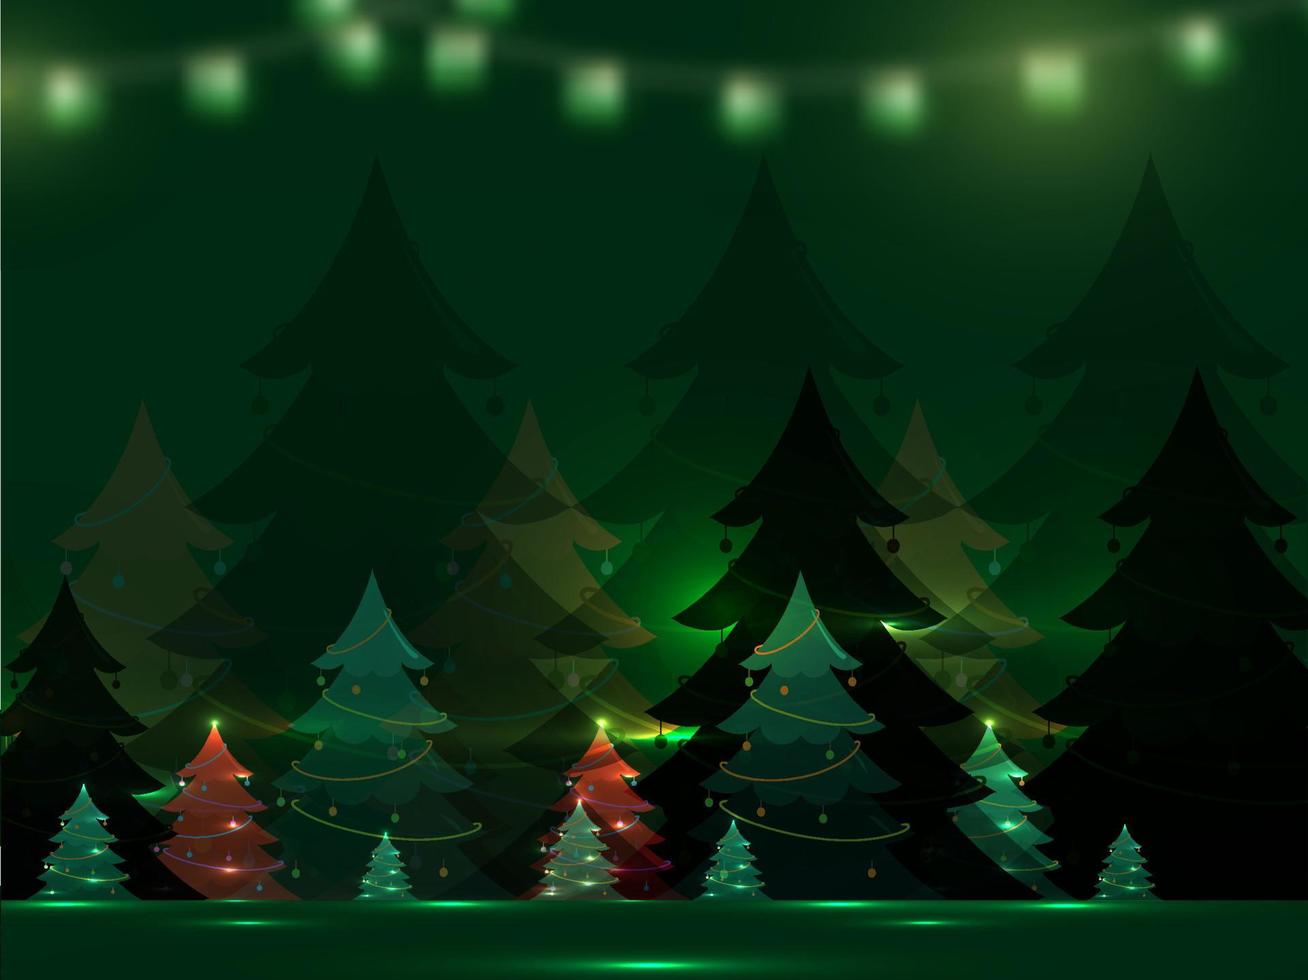 Decorative Xmas Trees With Lights Effect On Green Background. vector